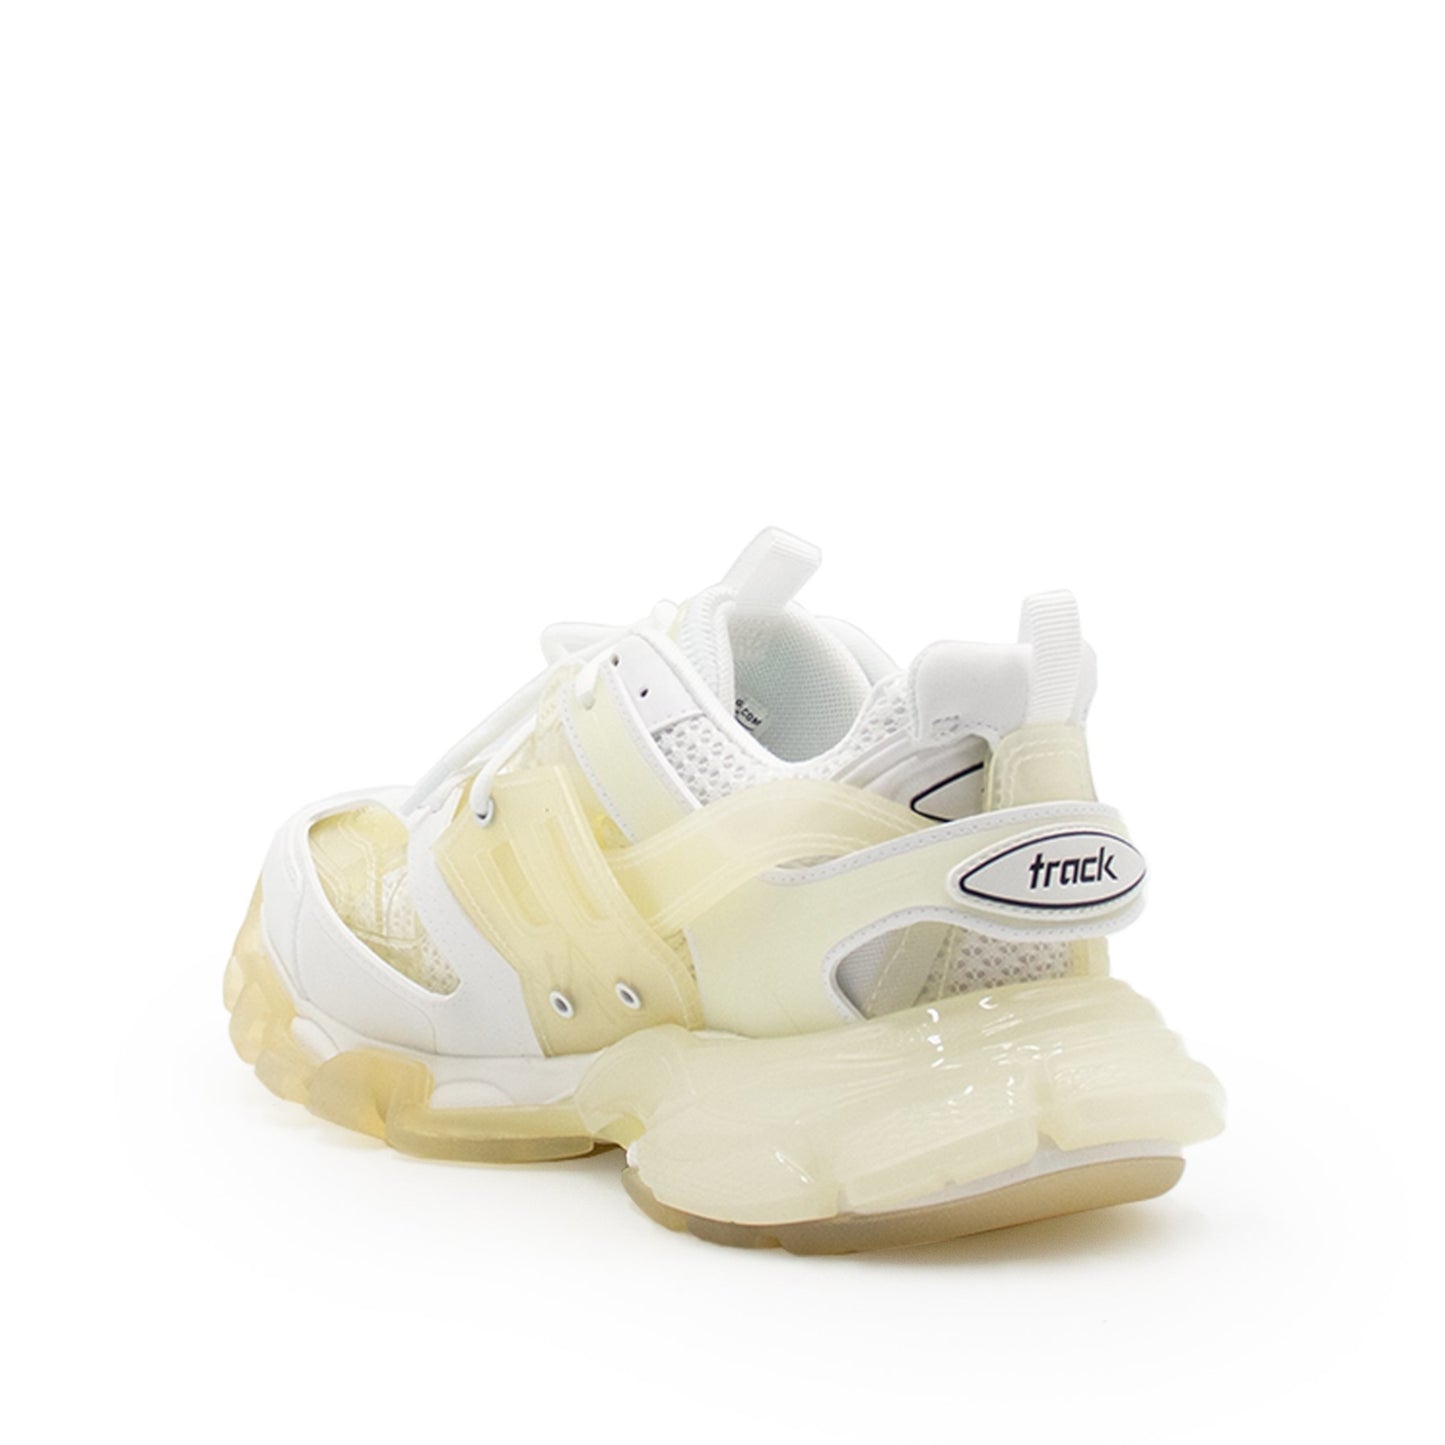 Track Clear Sole Sneaker in White